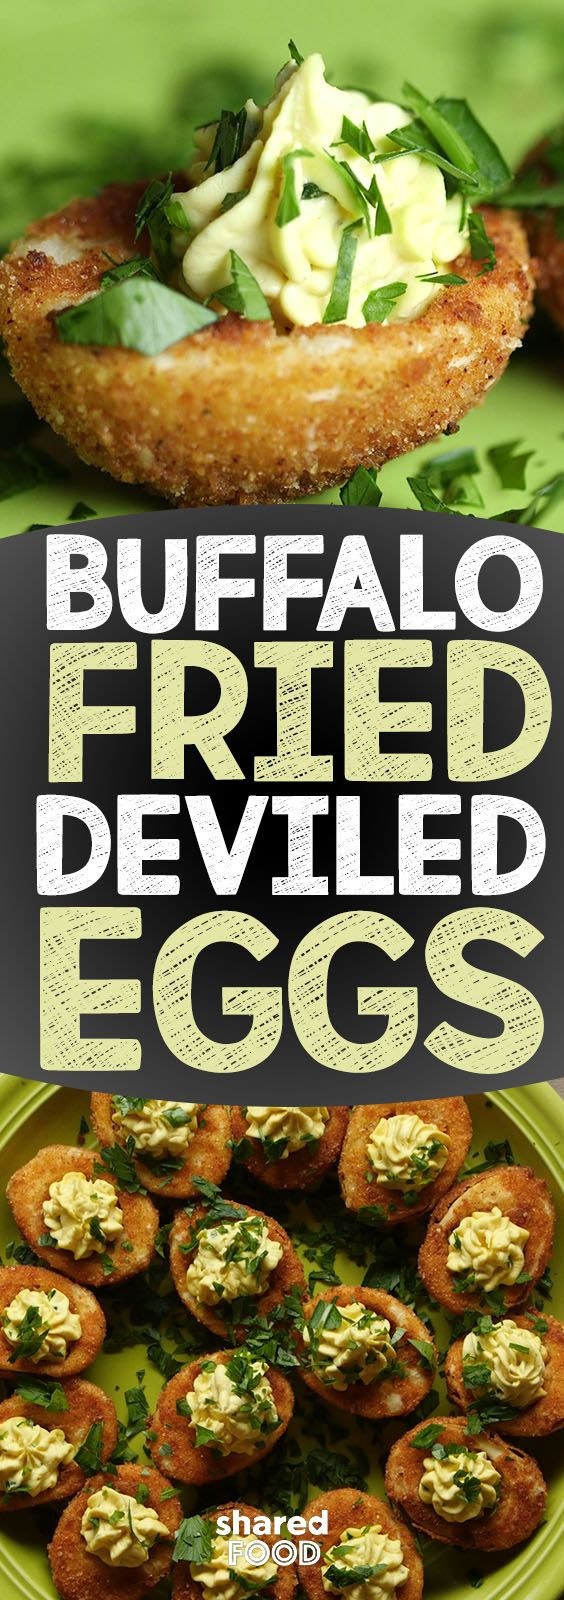 Deep Fried Buffalo Deviled Eggs
 These eggs are crispy creamy and chalk filled with